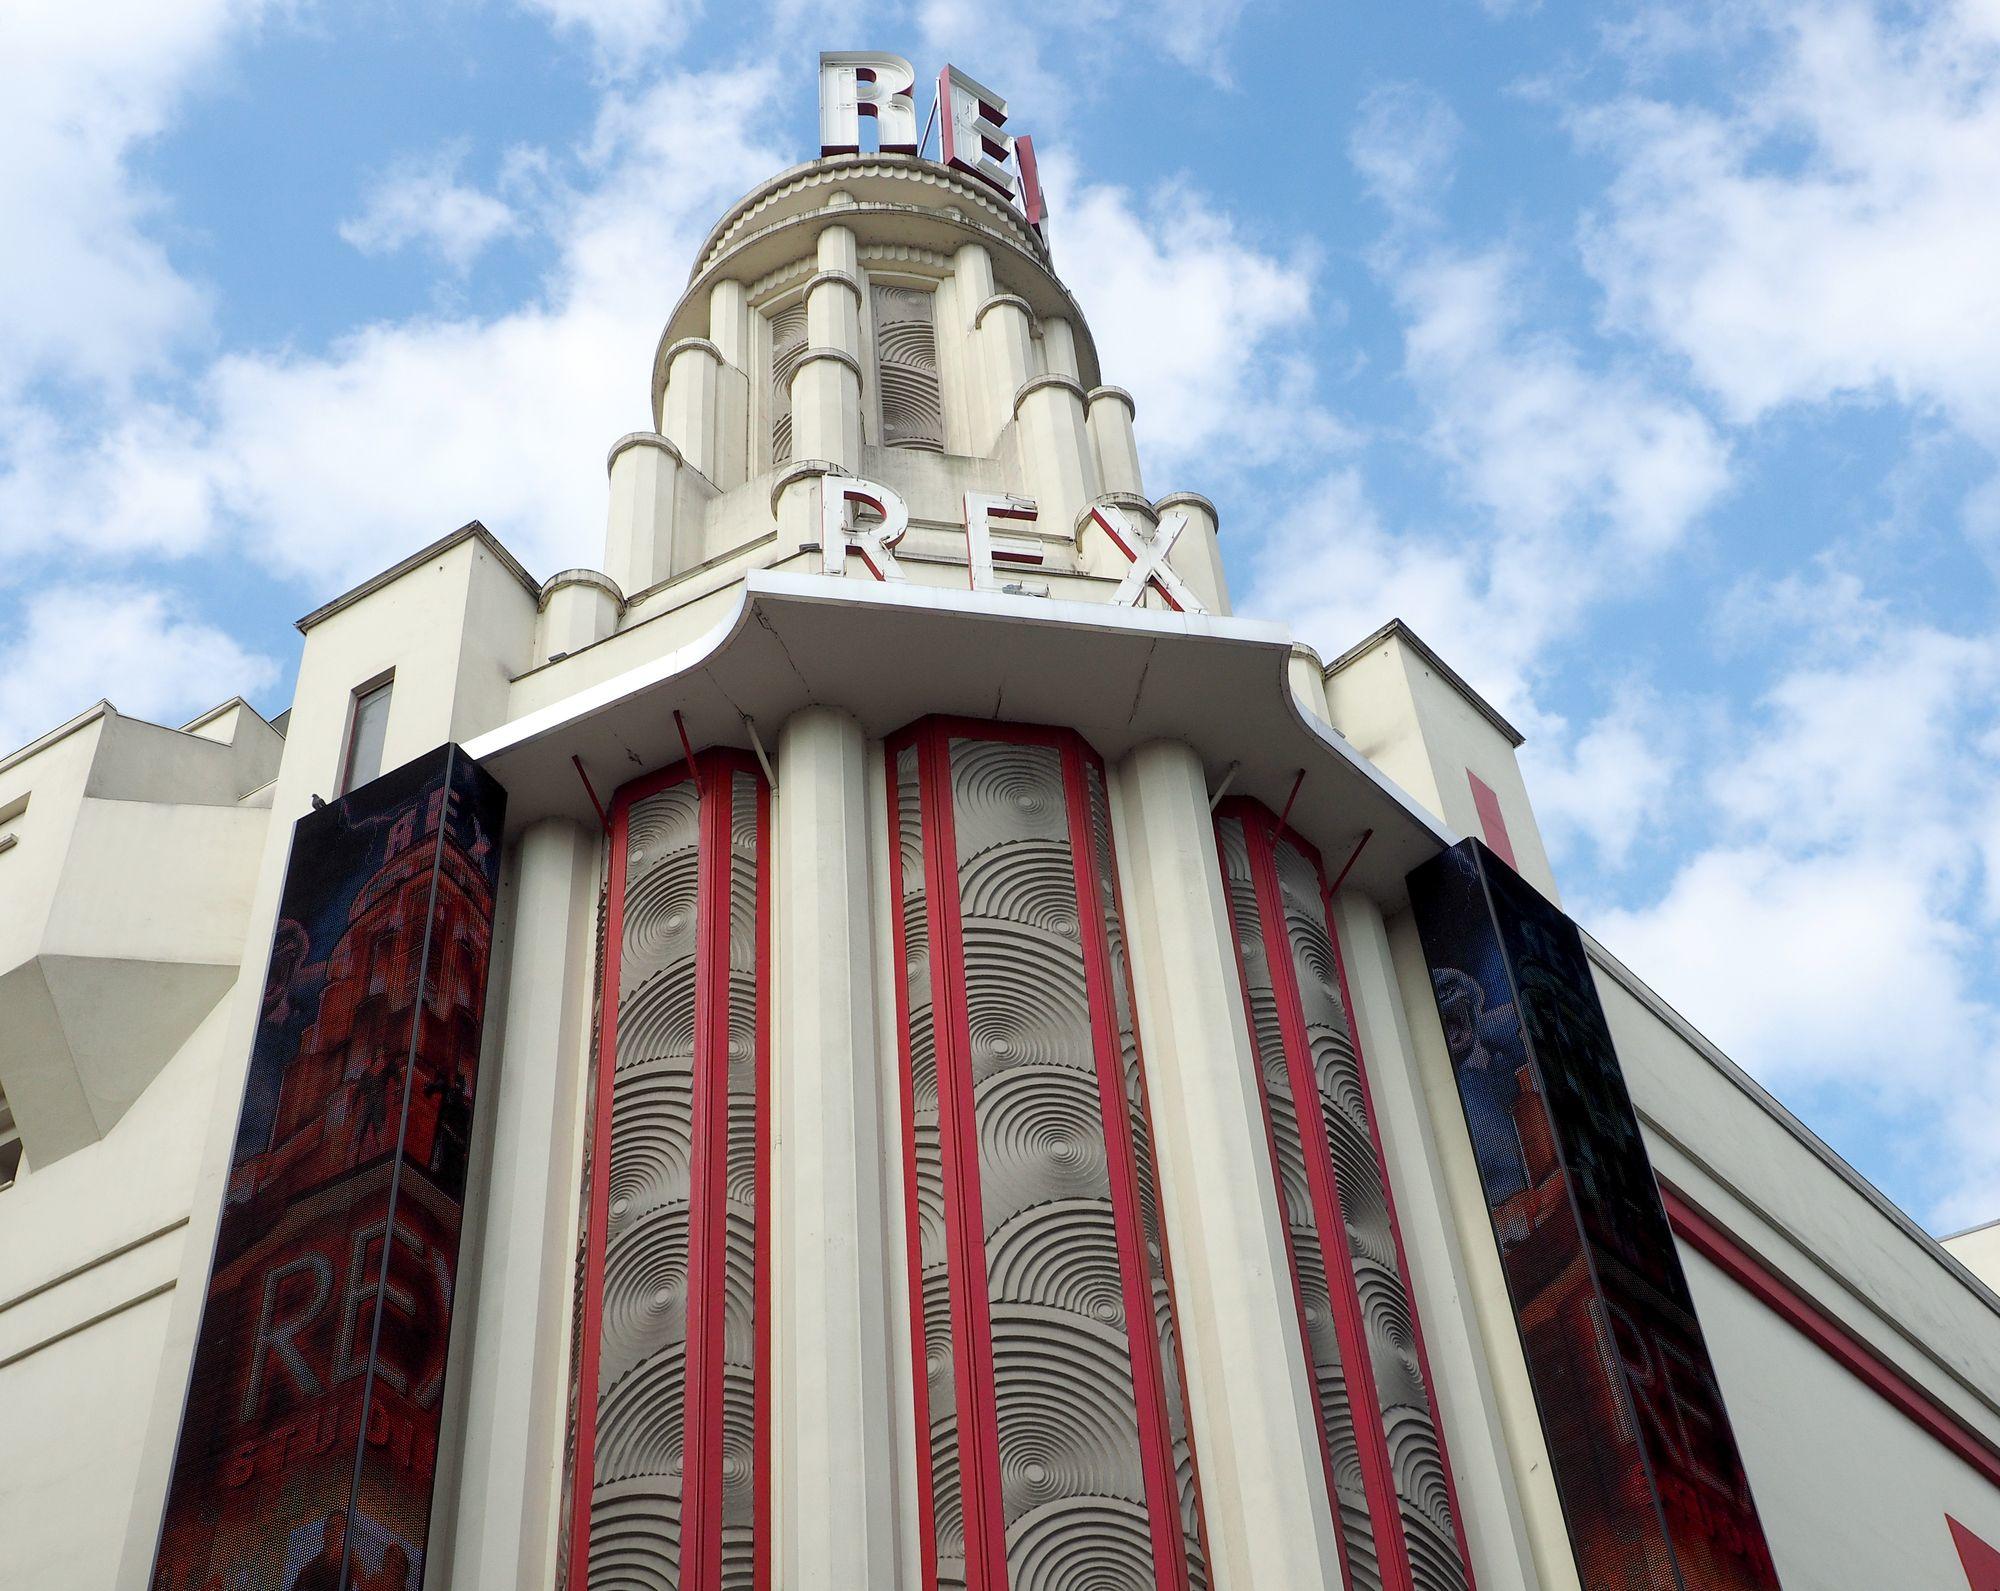 Along the Grands Boulevards, few steps from Hotel Grammont, stands the impressive Grand Rex movie theater.